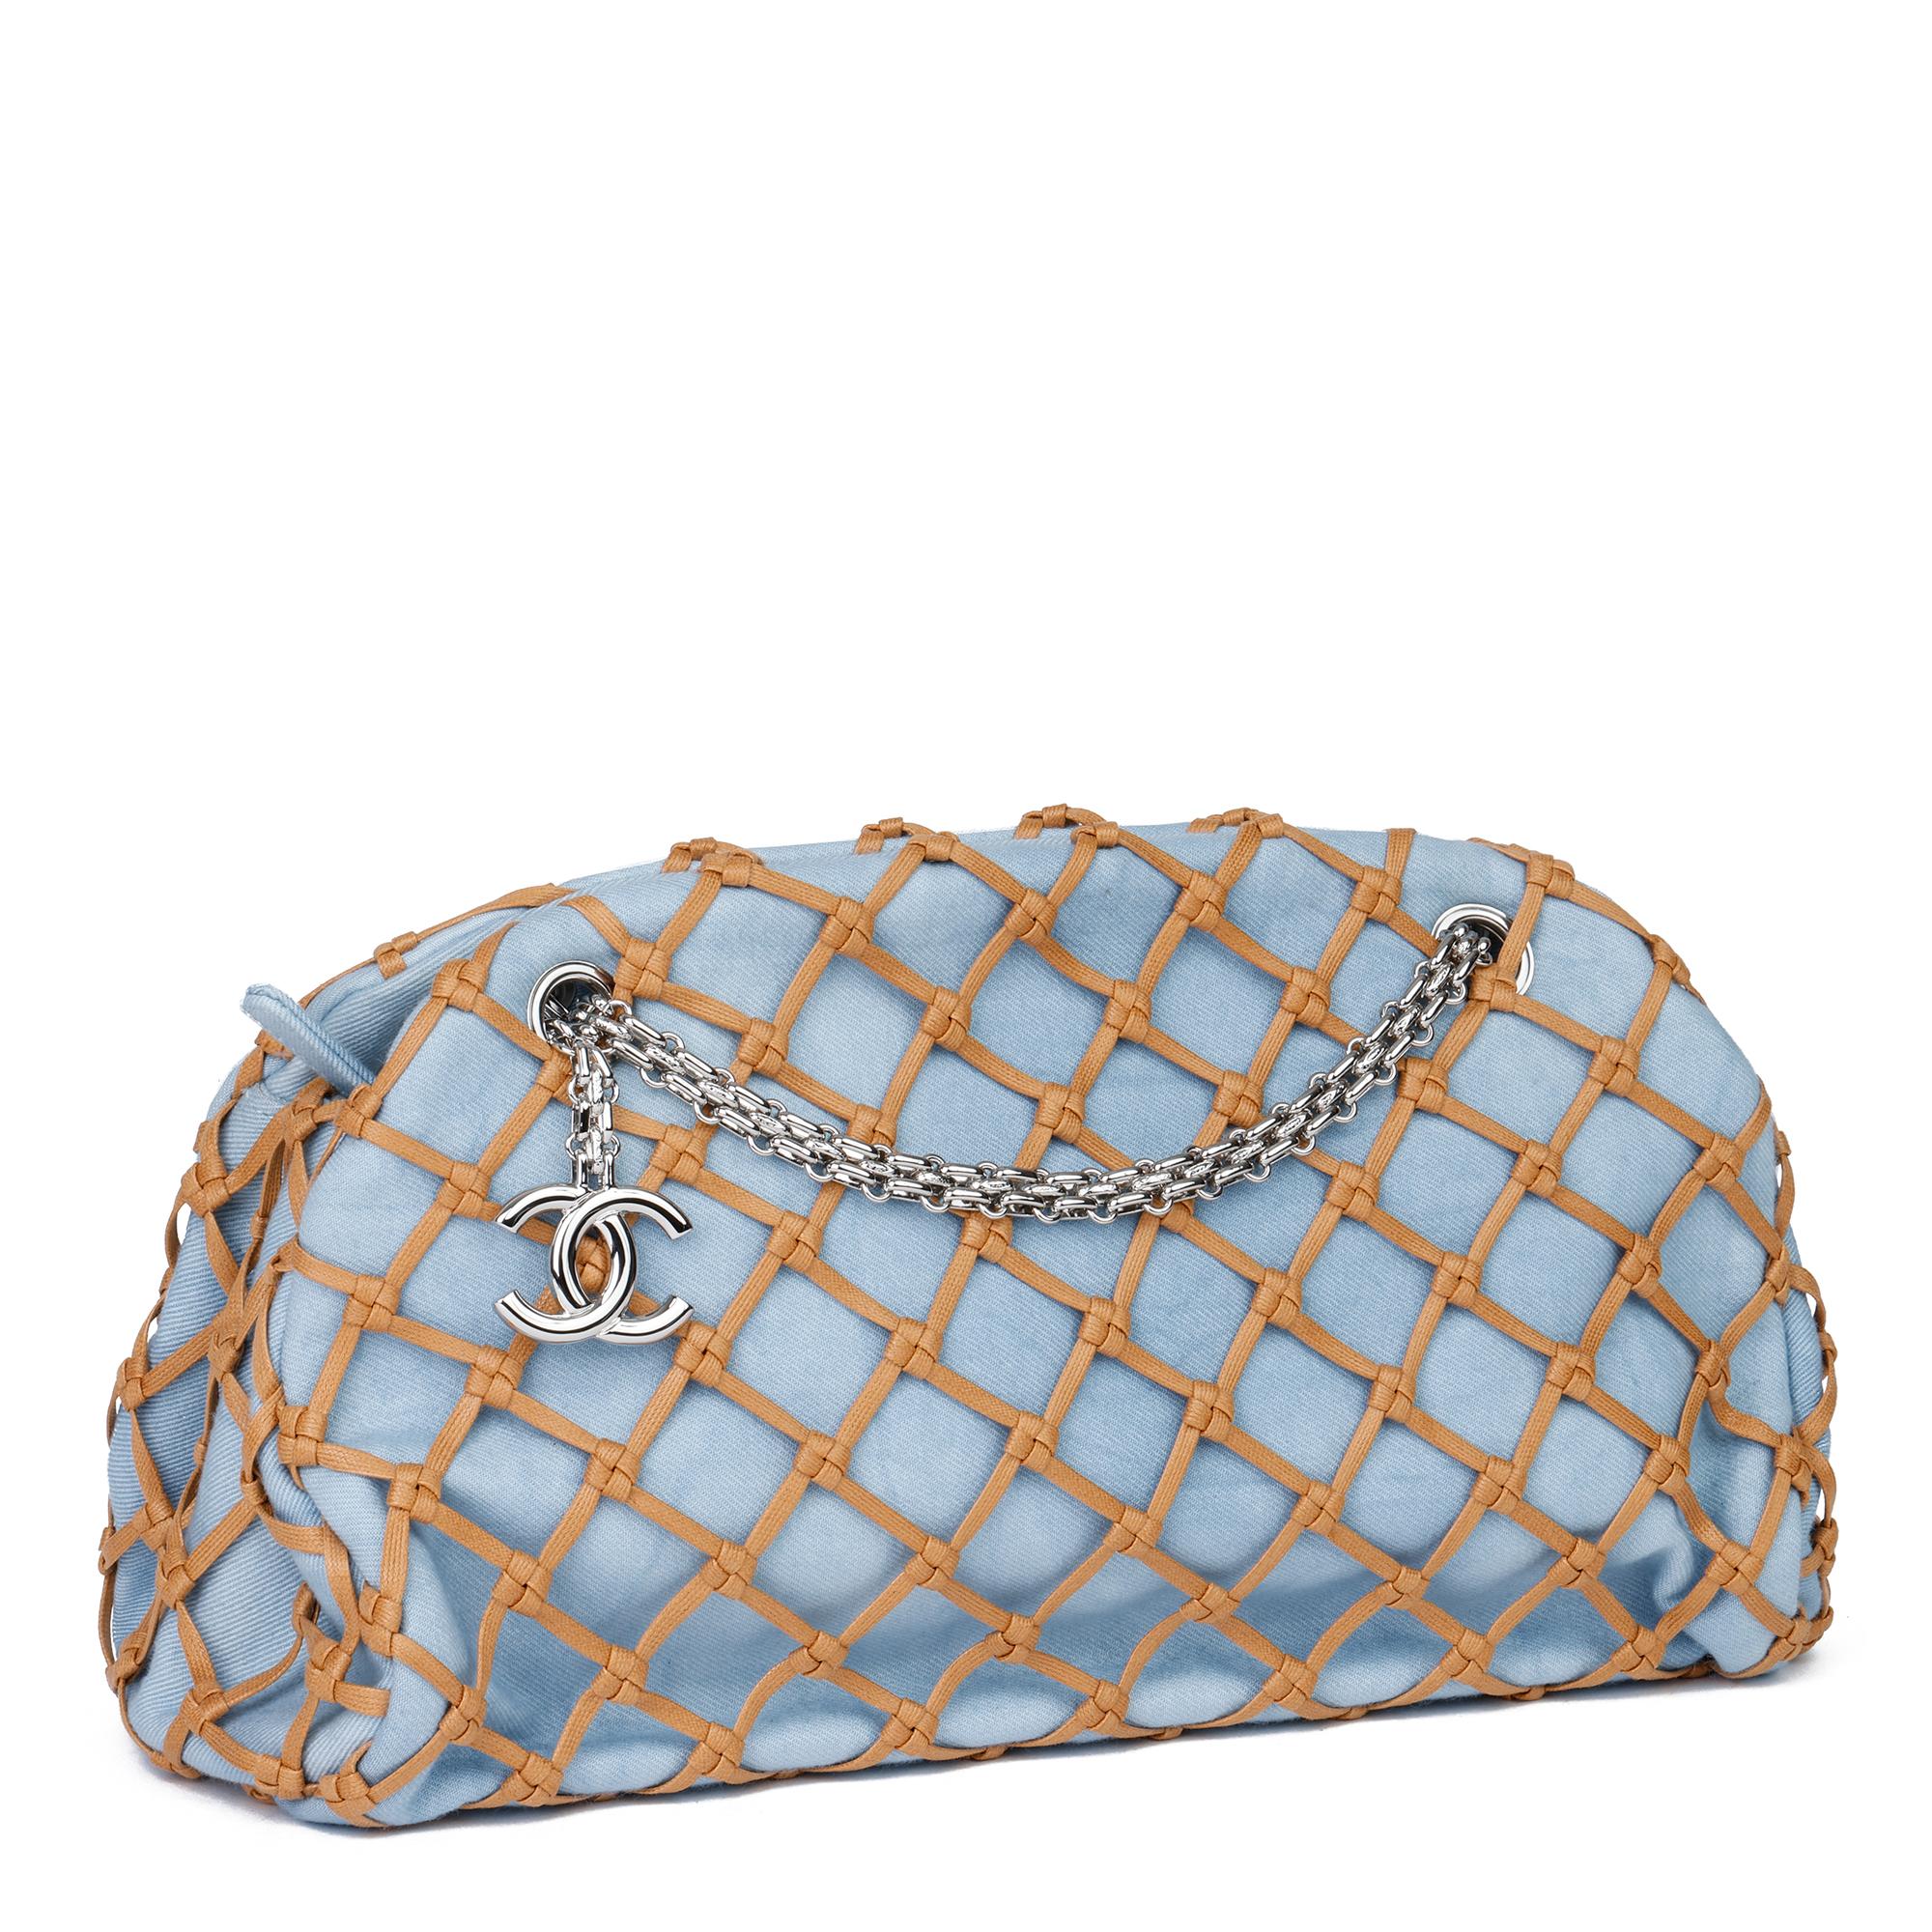 CHANEL
Light Blue Denim & Brown Woven Rope Canebier Just Mademoiselle Bowling Bag

Serial Number: 14184694
Age (Circa): 2011
Accompanied By: Chanel Dust Bag, Authenticity Card, Care Booklet
Authenticity Details: Authenticity Card, Serial Sticker